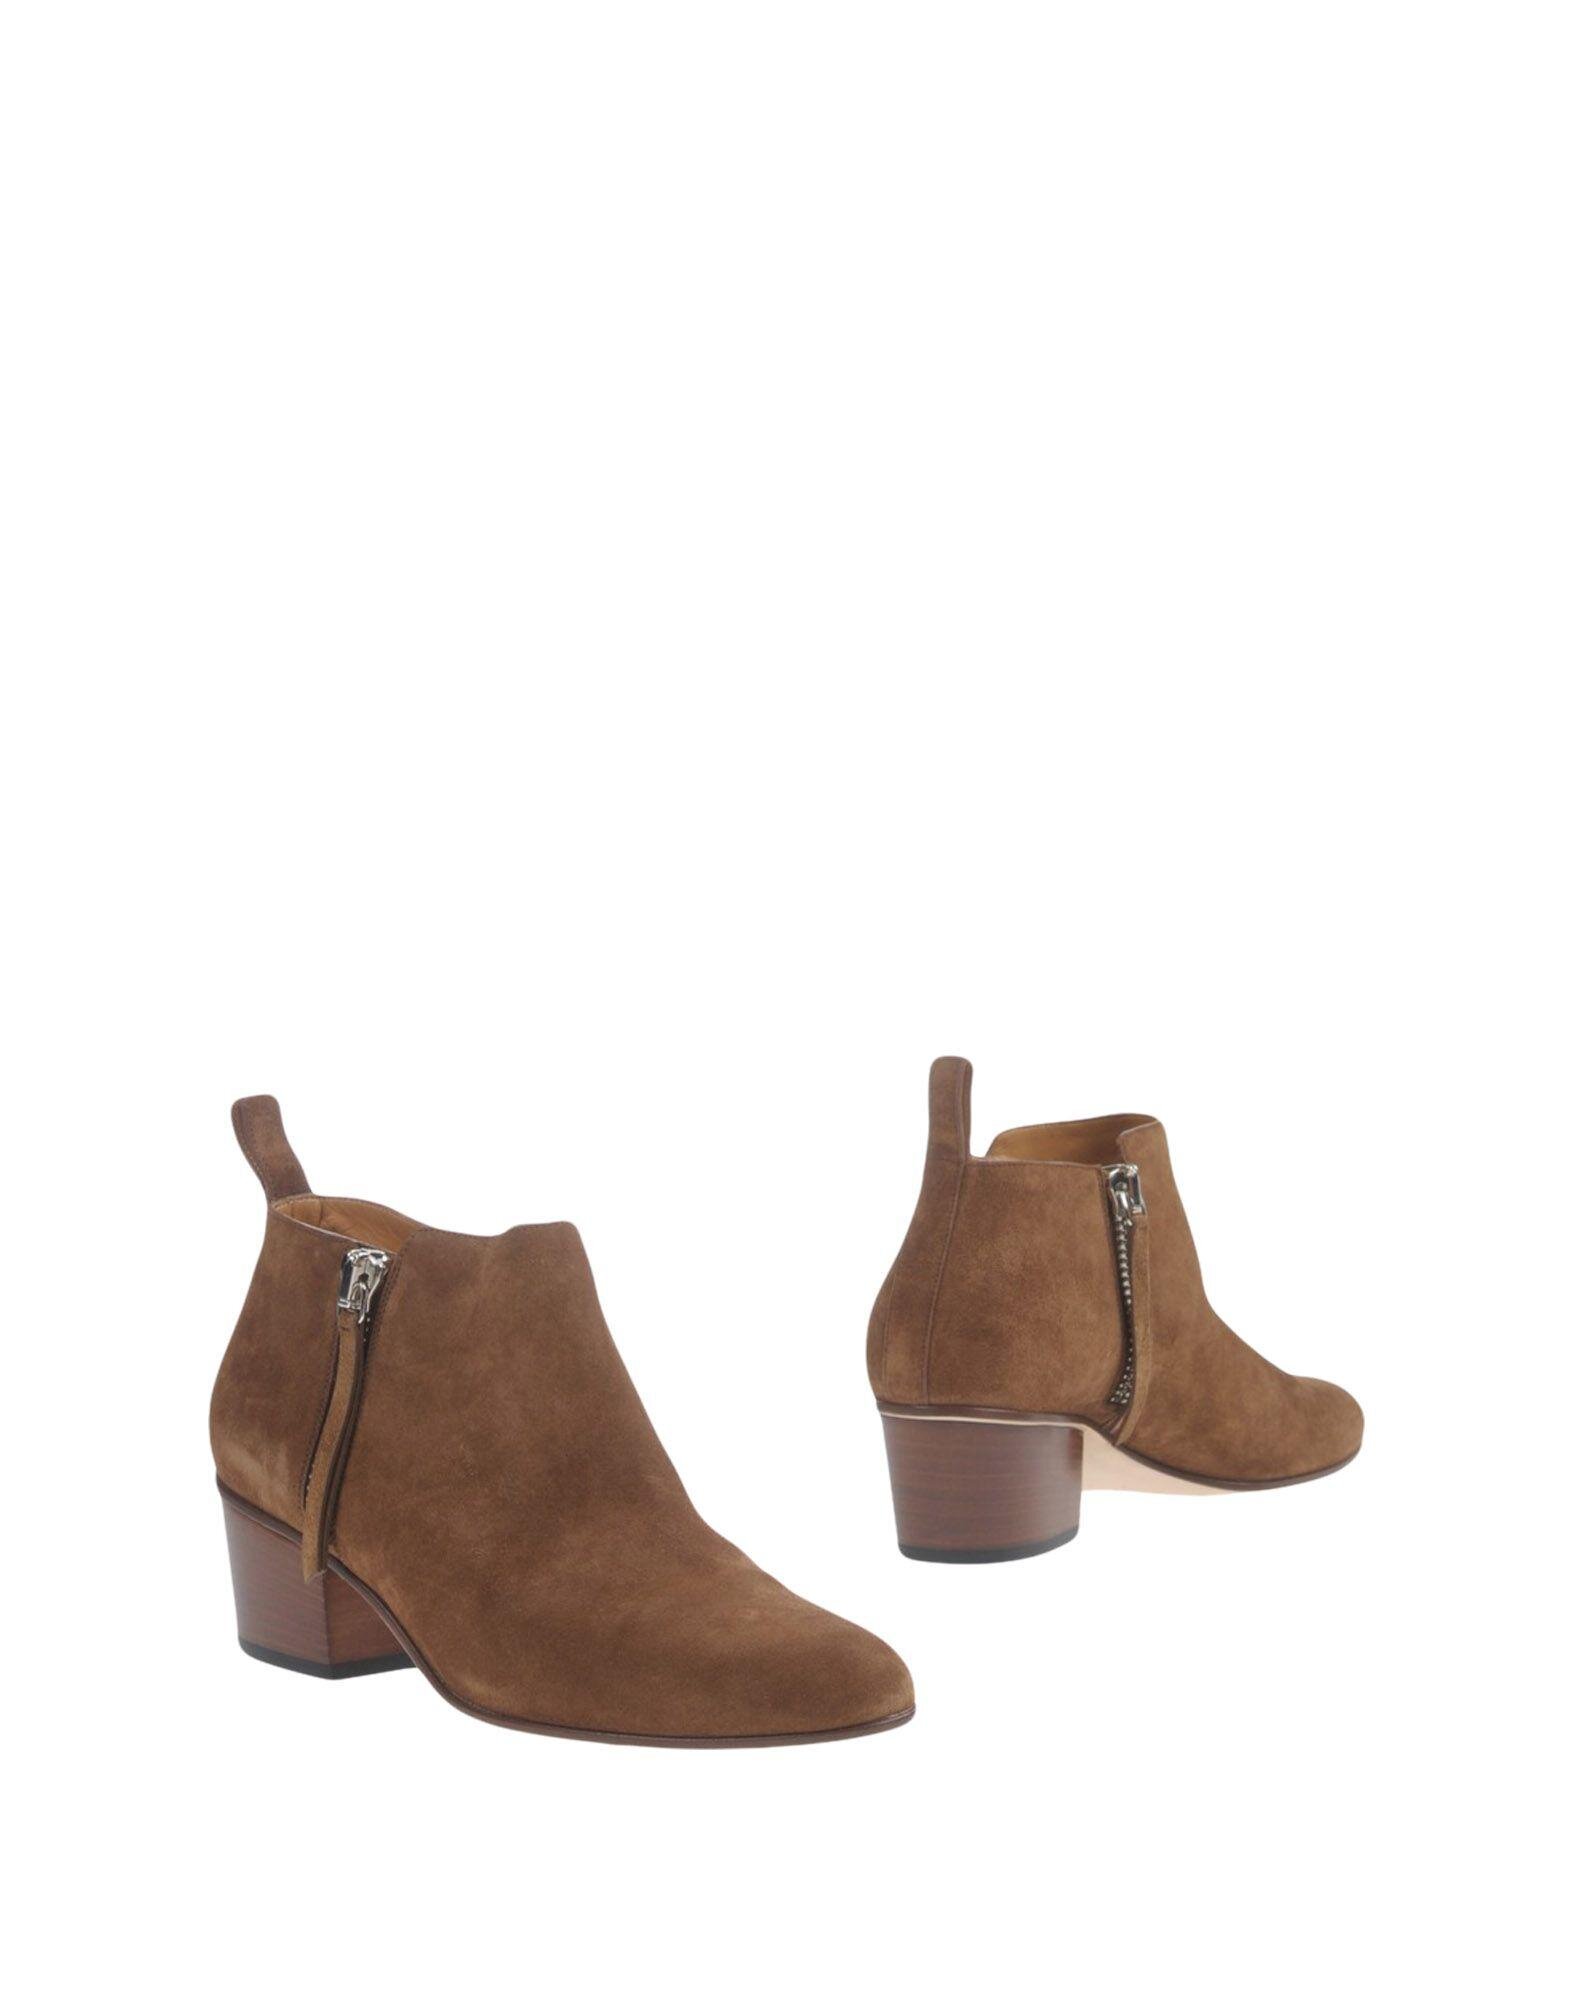 Gucci Suede Ankle Boots in Brown.jpg